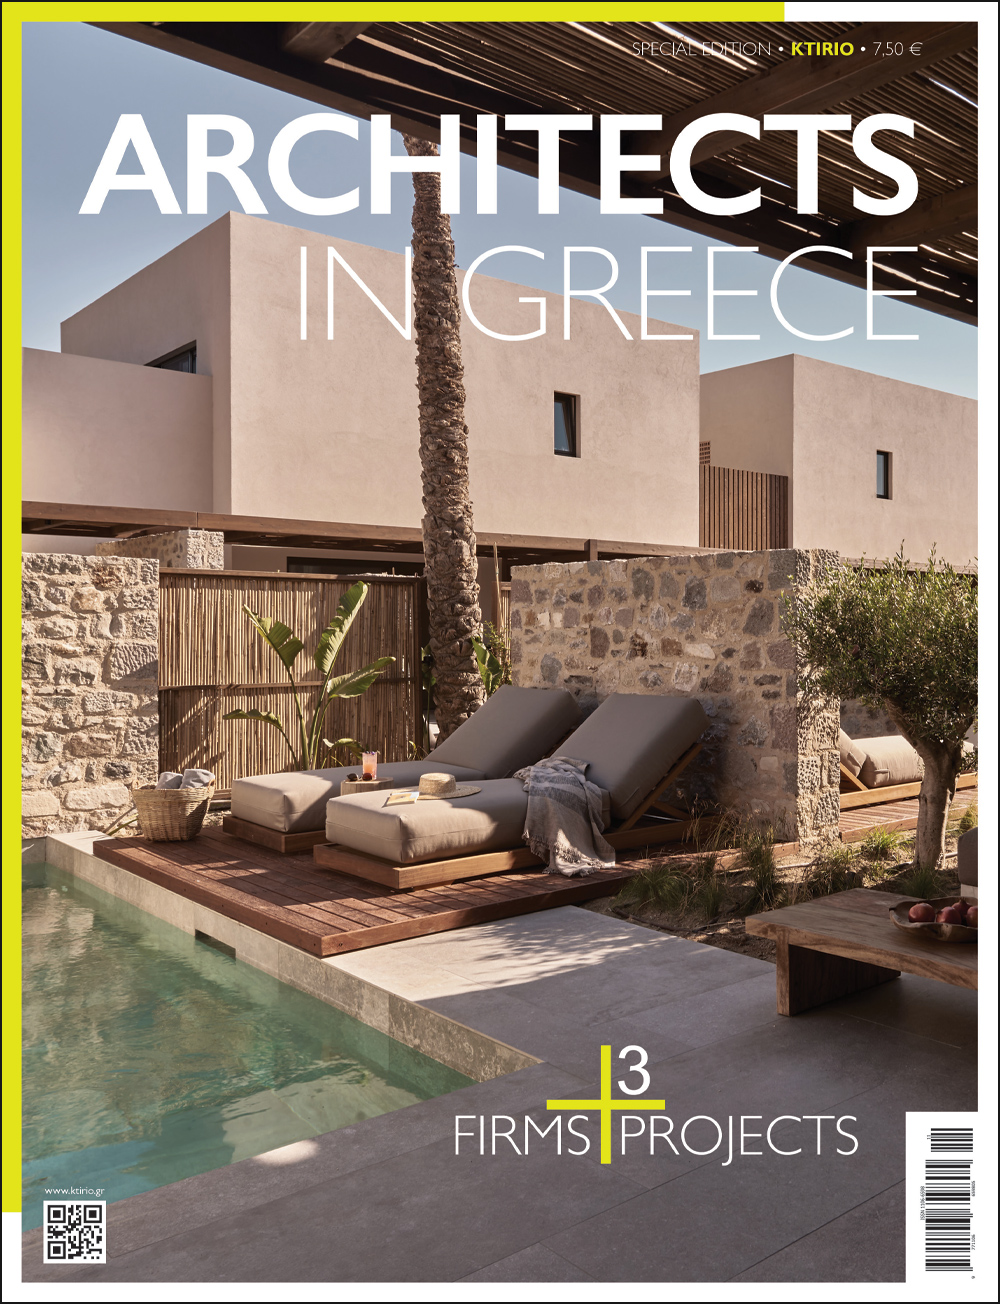 ARCHITECTS IN GREECE 3